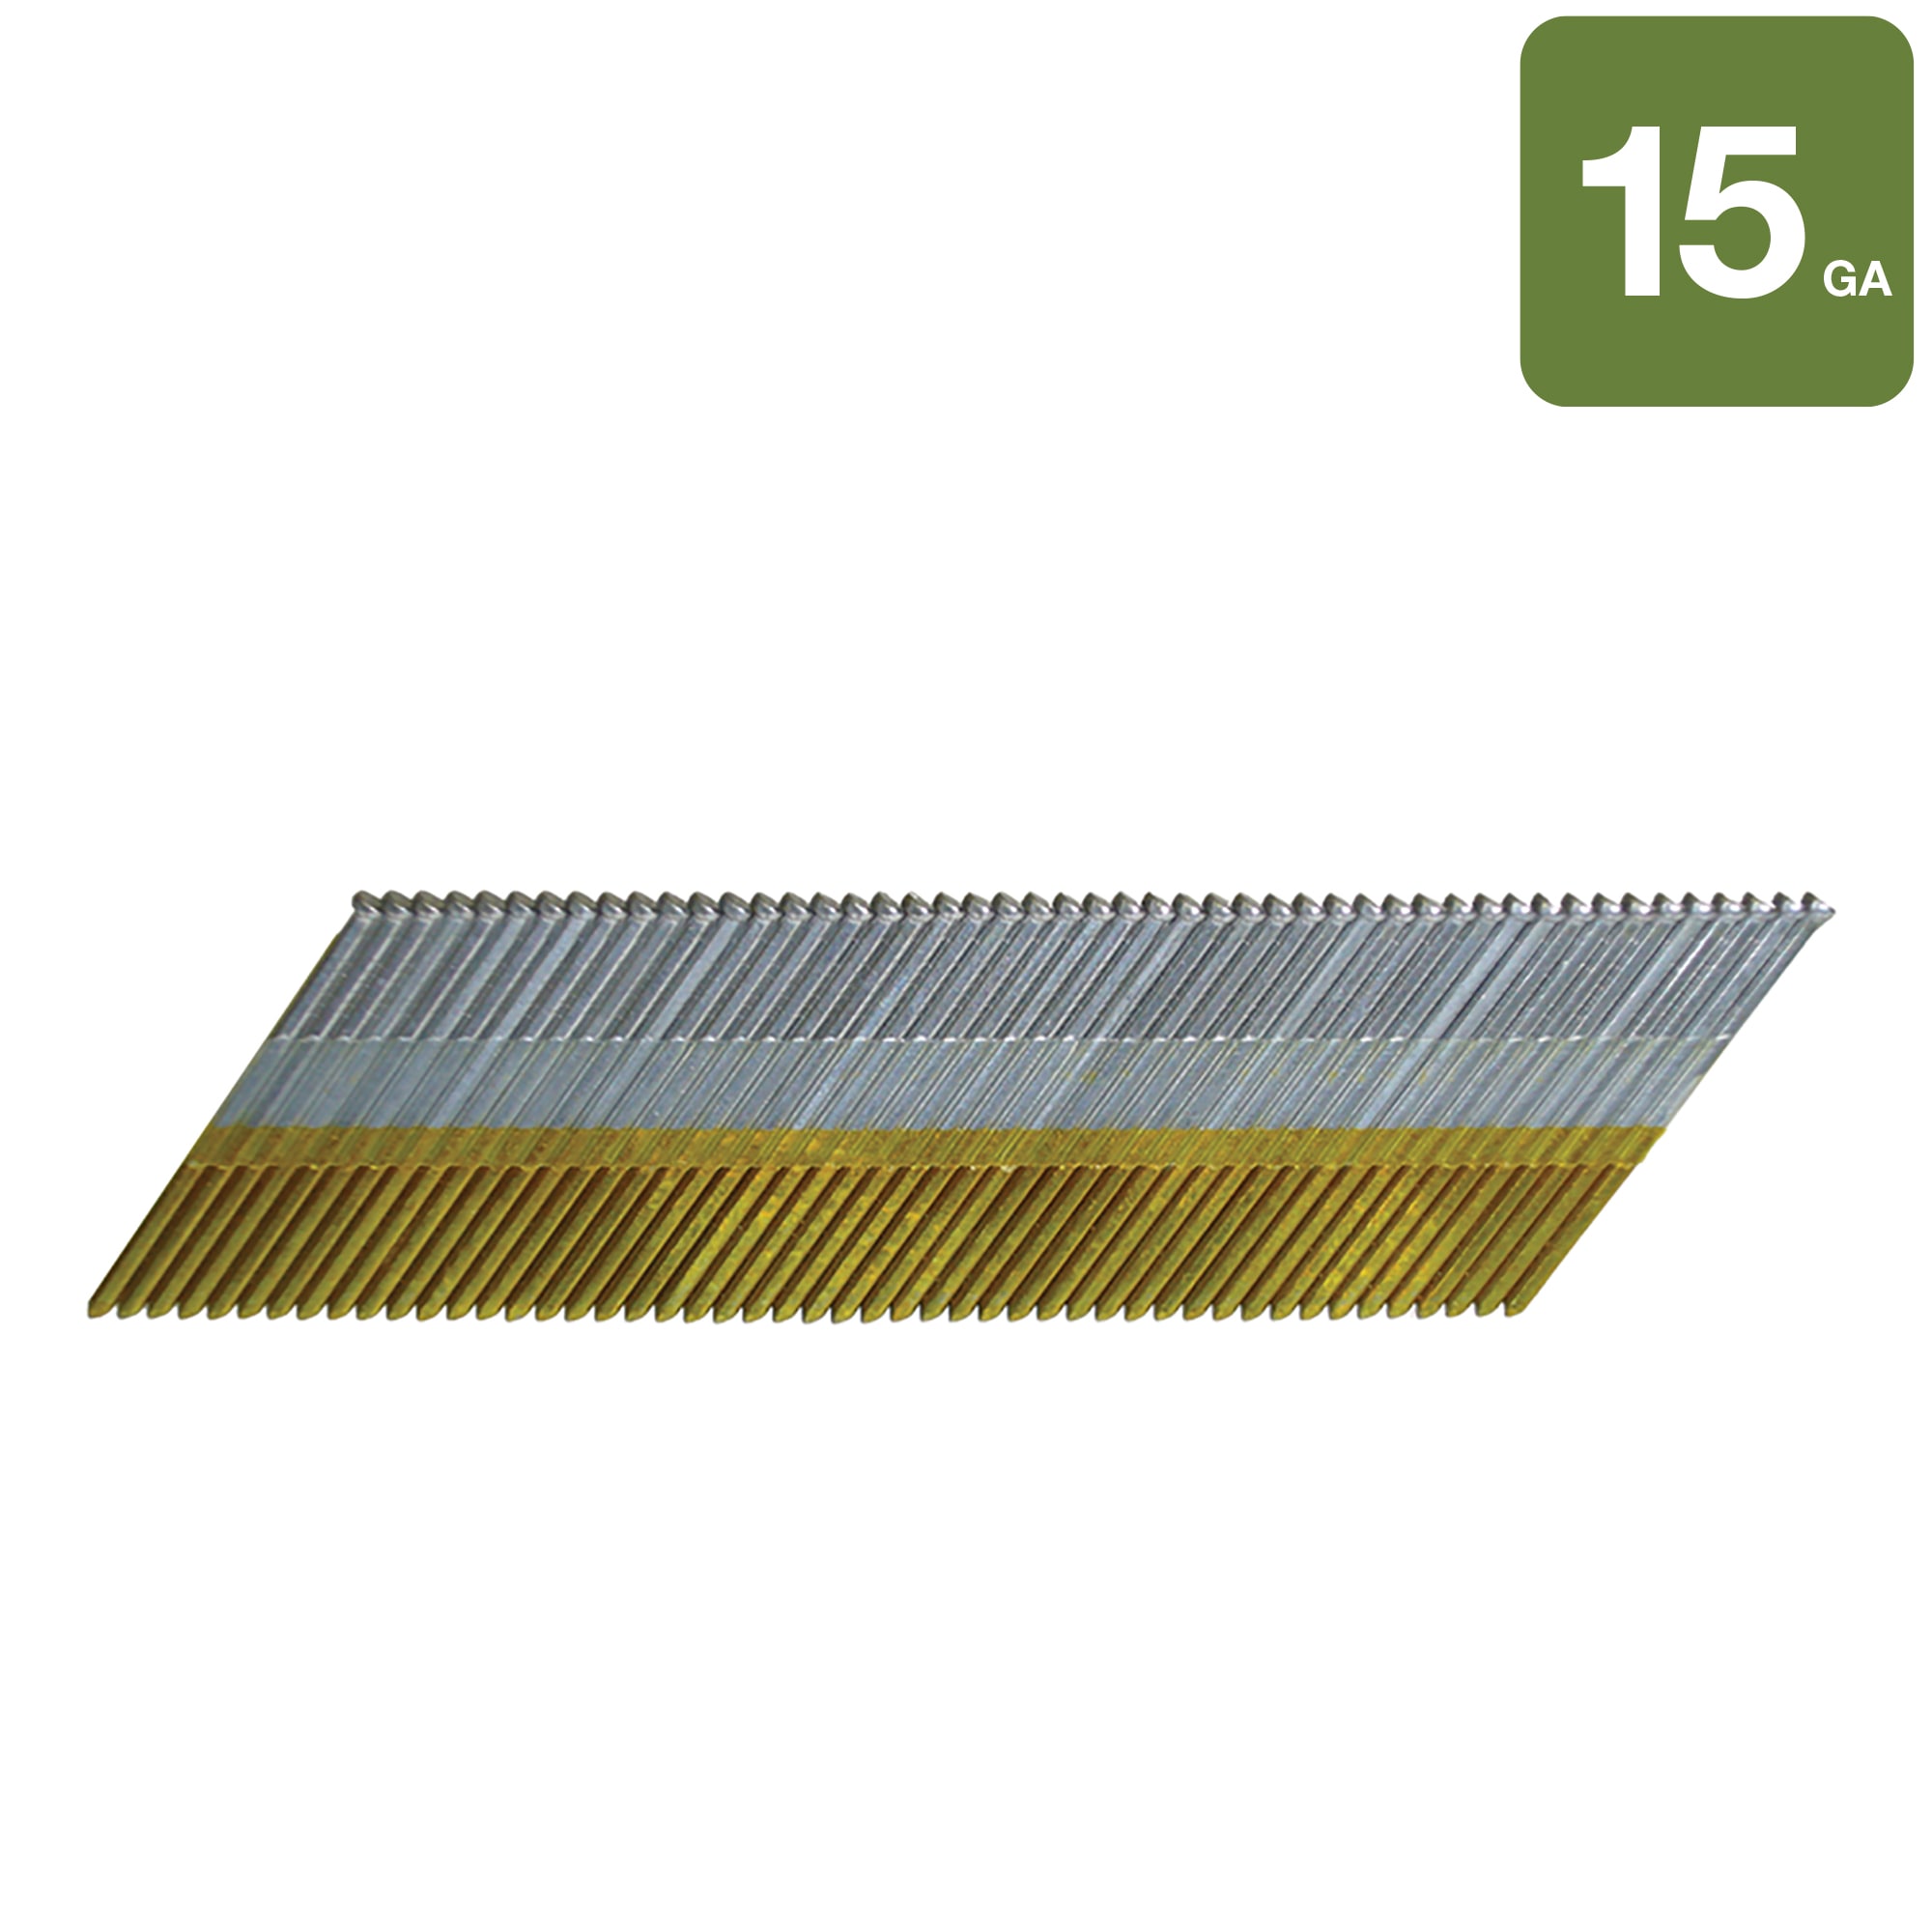 Armstrong Ceilings 1-1/4-in 14-Gauge Copper-plated Finish Nails at Lowes.com